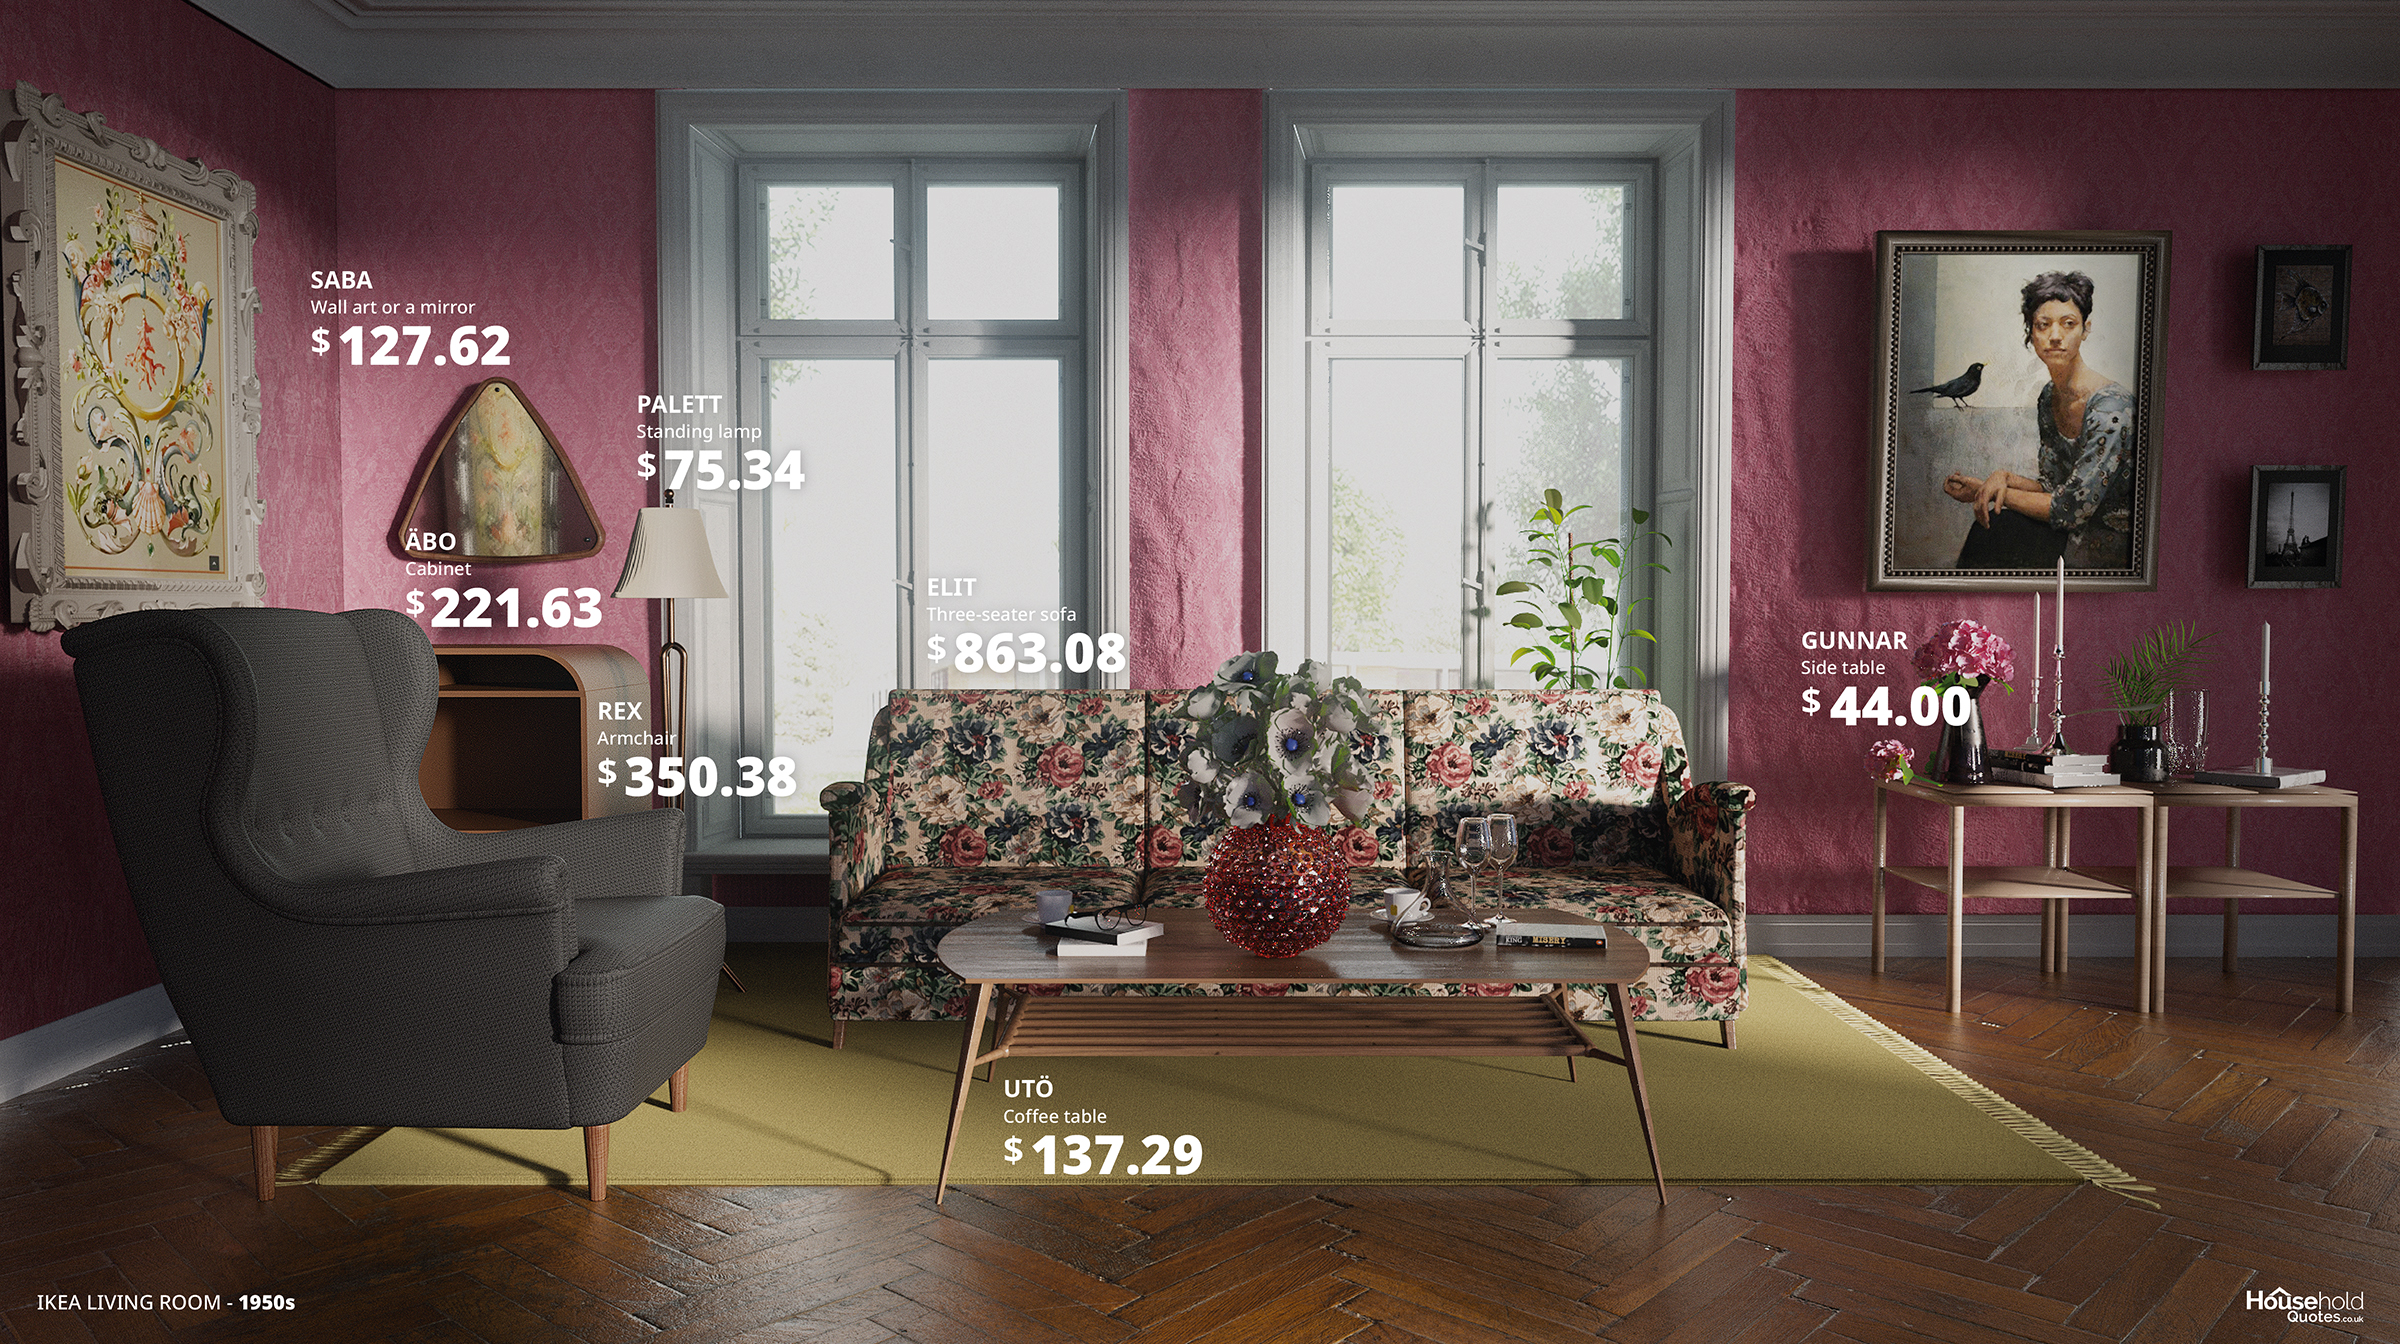 01_The-70-Year-Evolution-of-the-IKEA-Living-Room_1950s